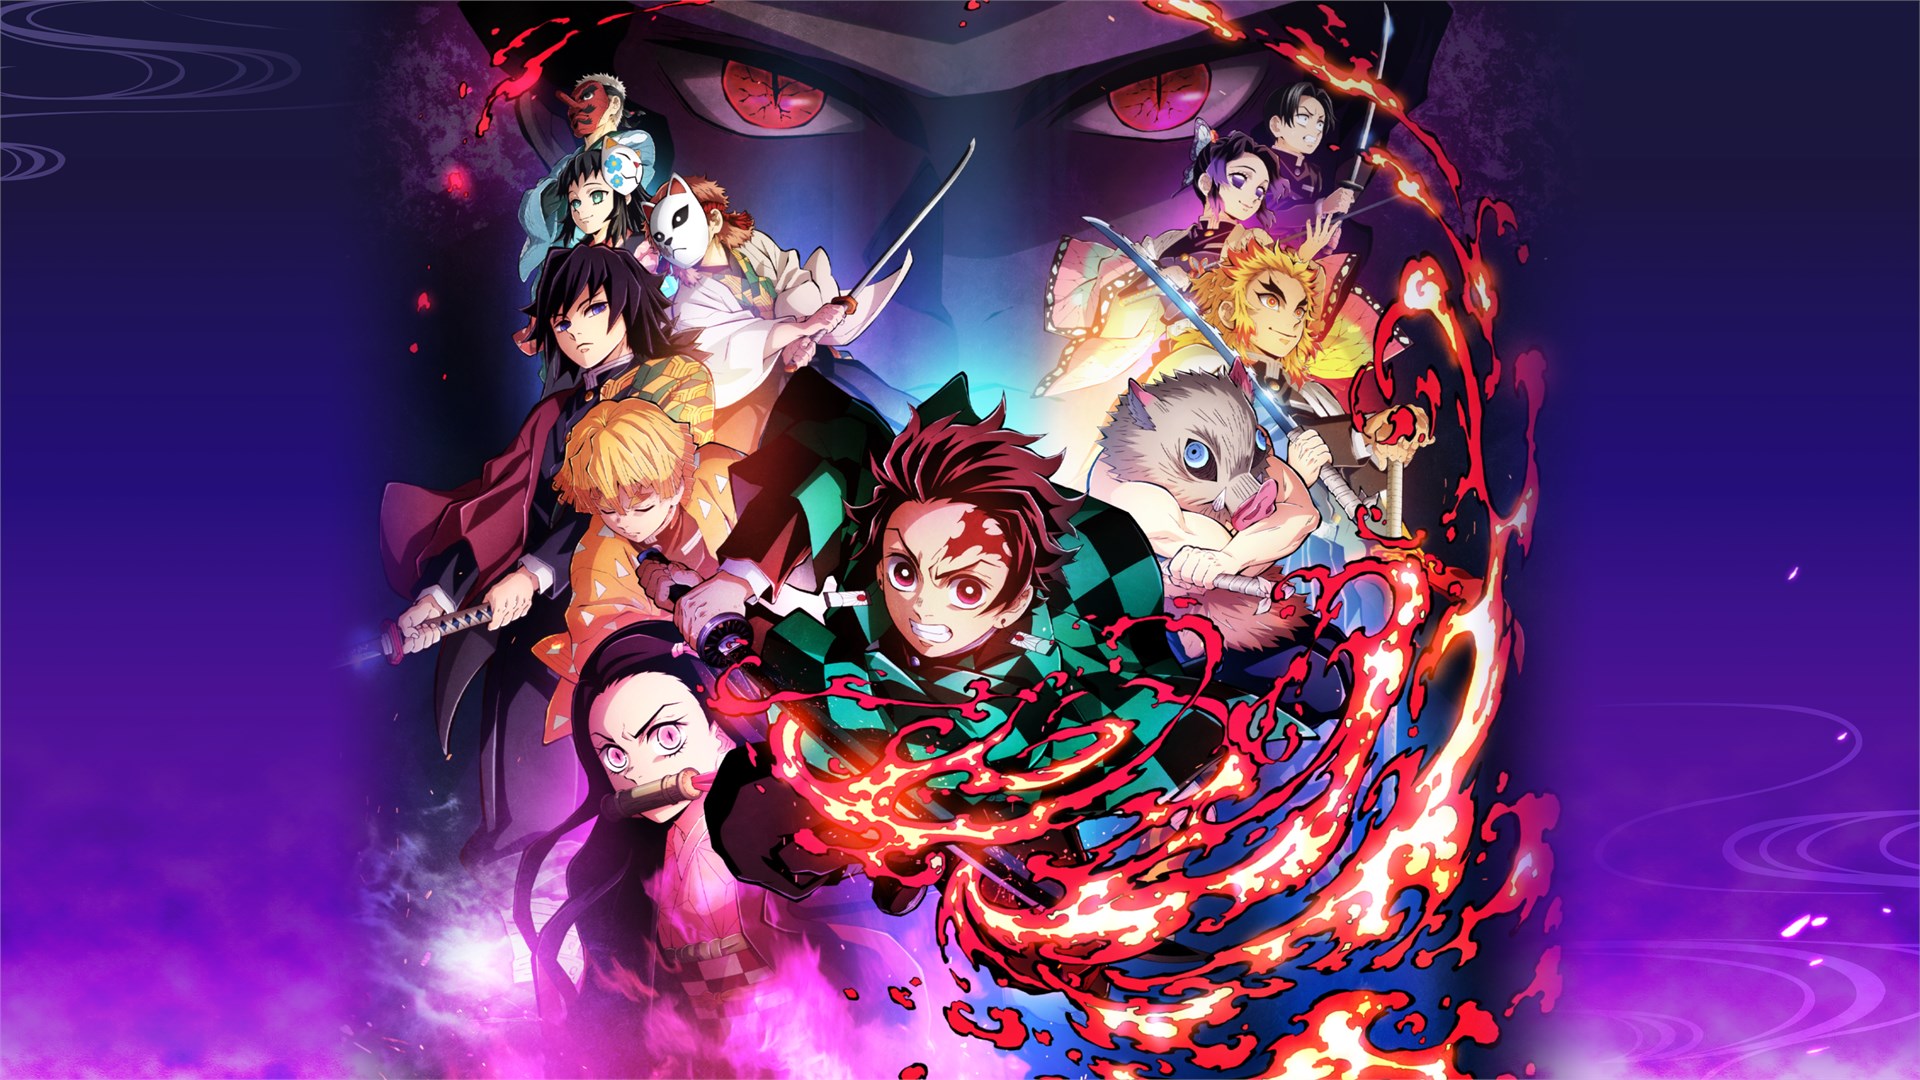 Video For Demon Slayer -Kimetsu no Yaiba- The Hinokami Chronicles Is Now Available For Xbox One And Xbox Series X|S